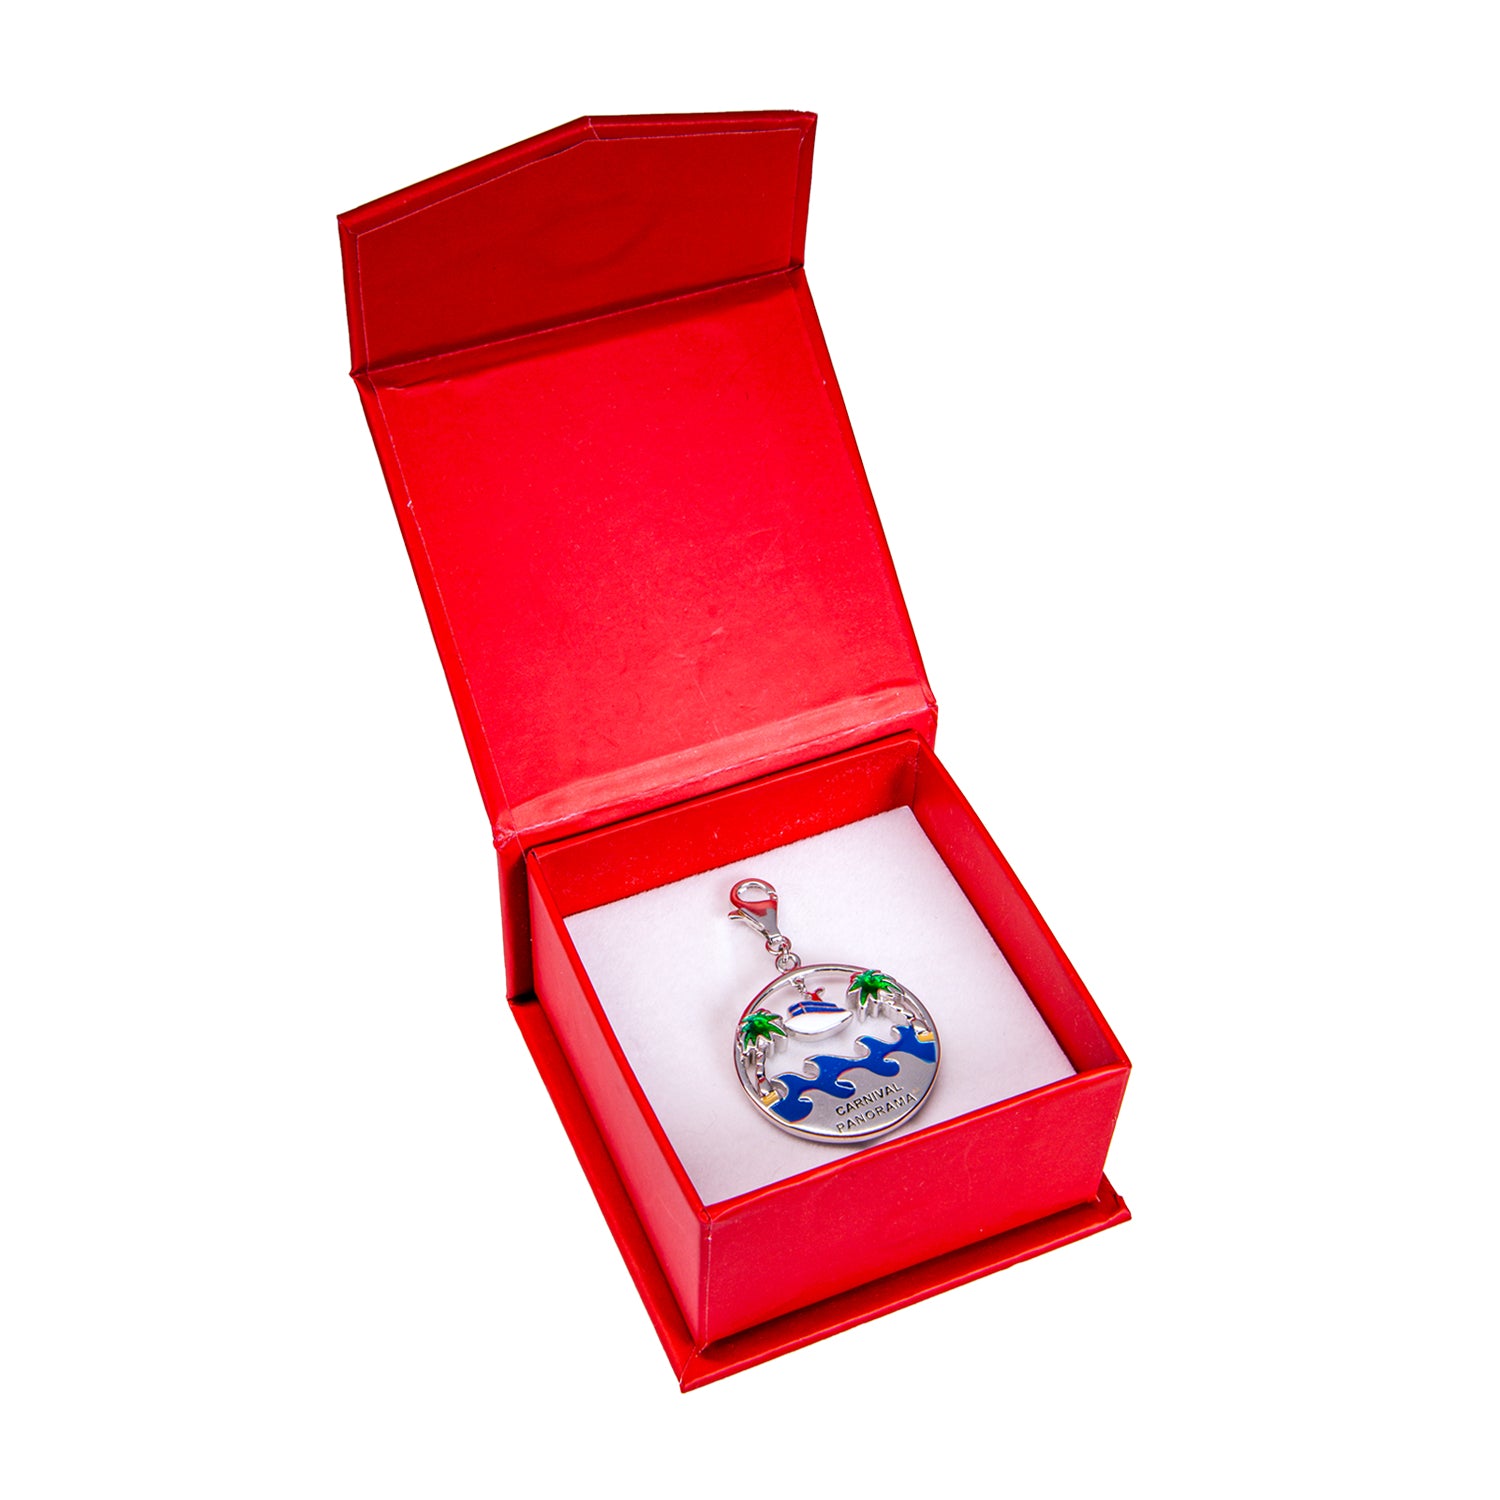 Carnival Panorama Swarovski Charm with red box top view